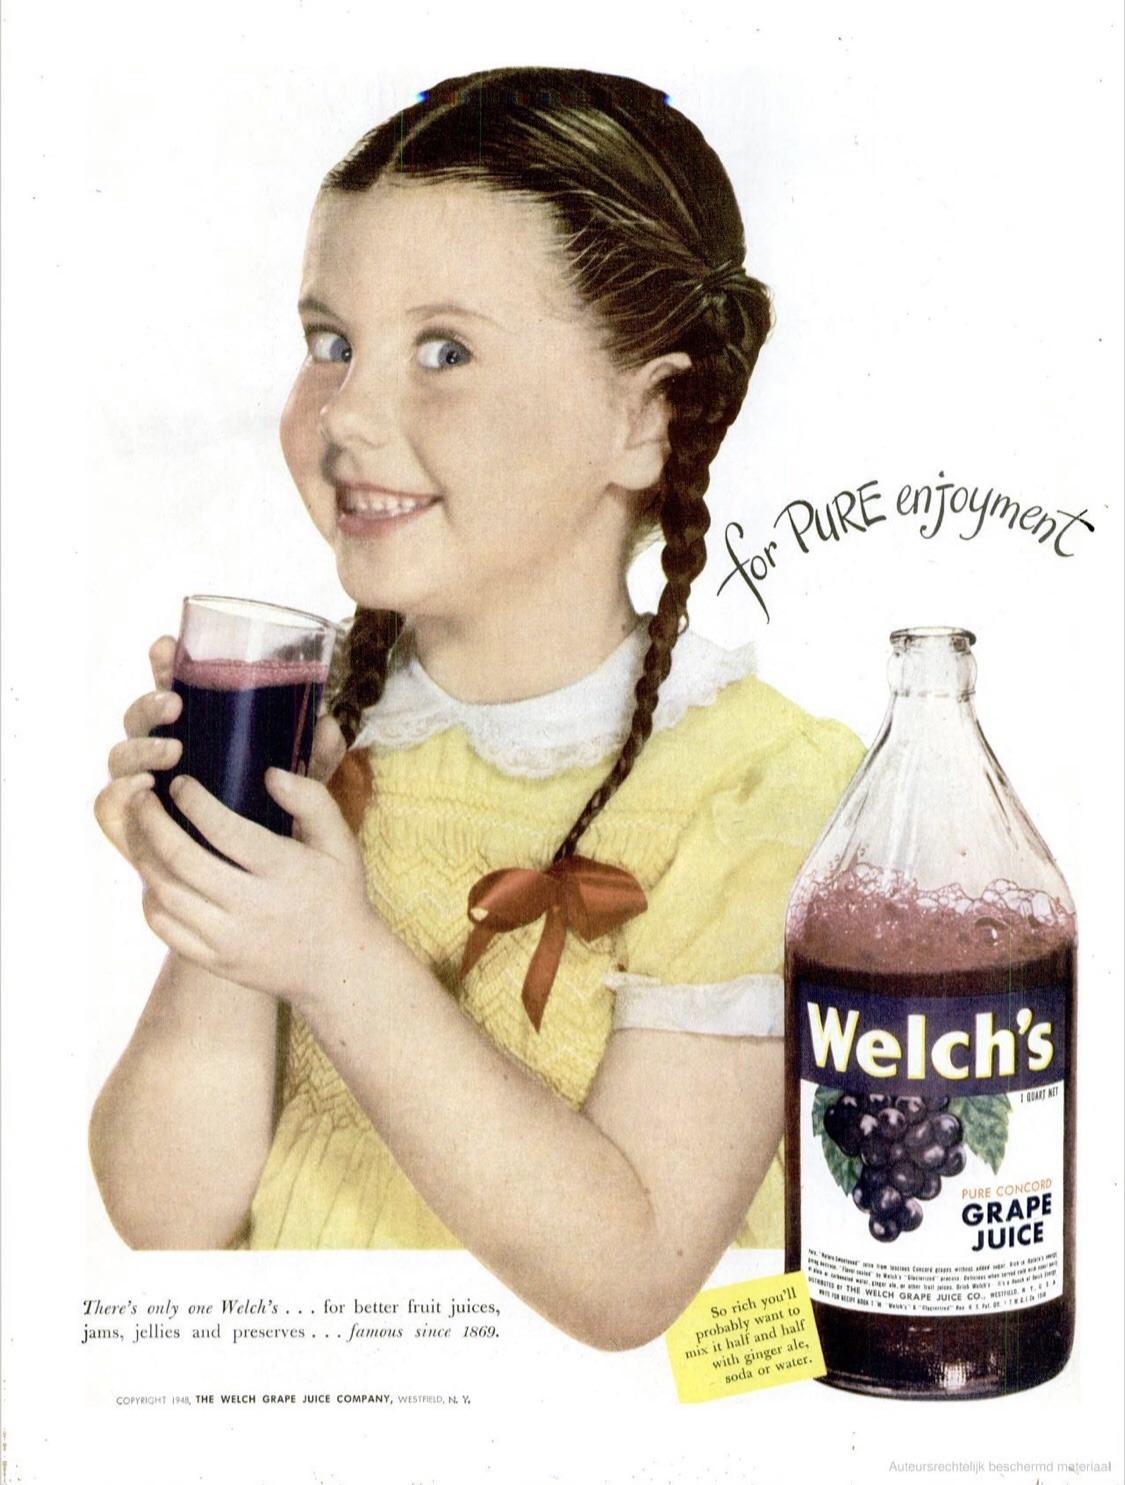 There's ouly one Welch's. . • for better fruit juices, jams, jellies and preserves . . • famous since 1869.